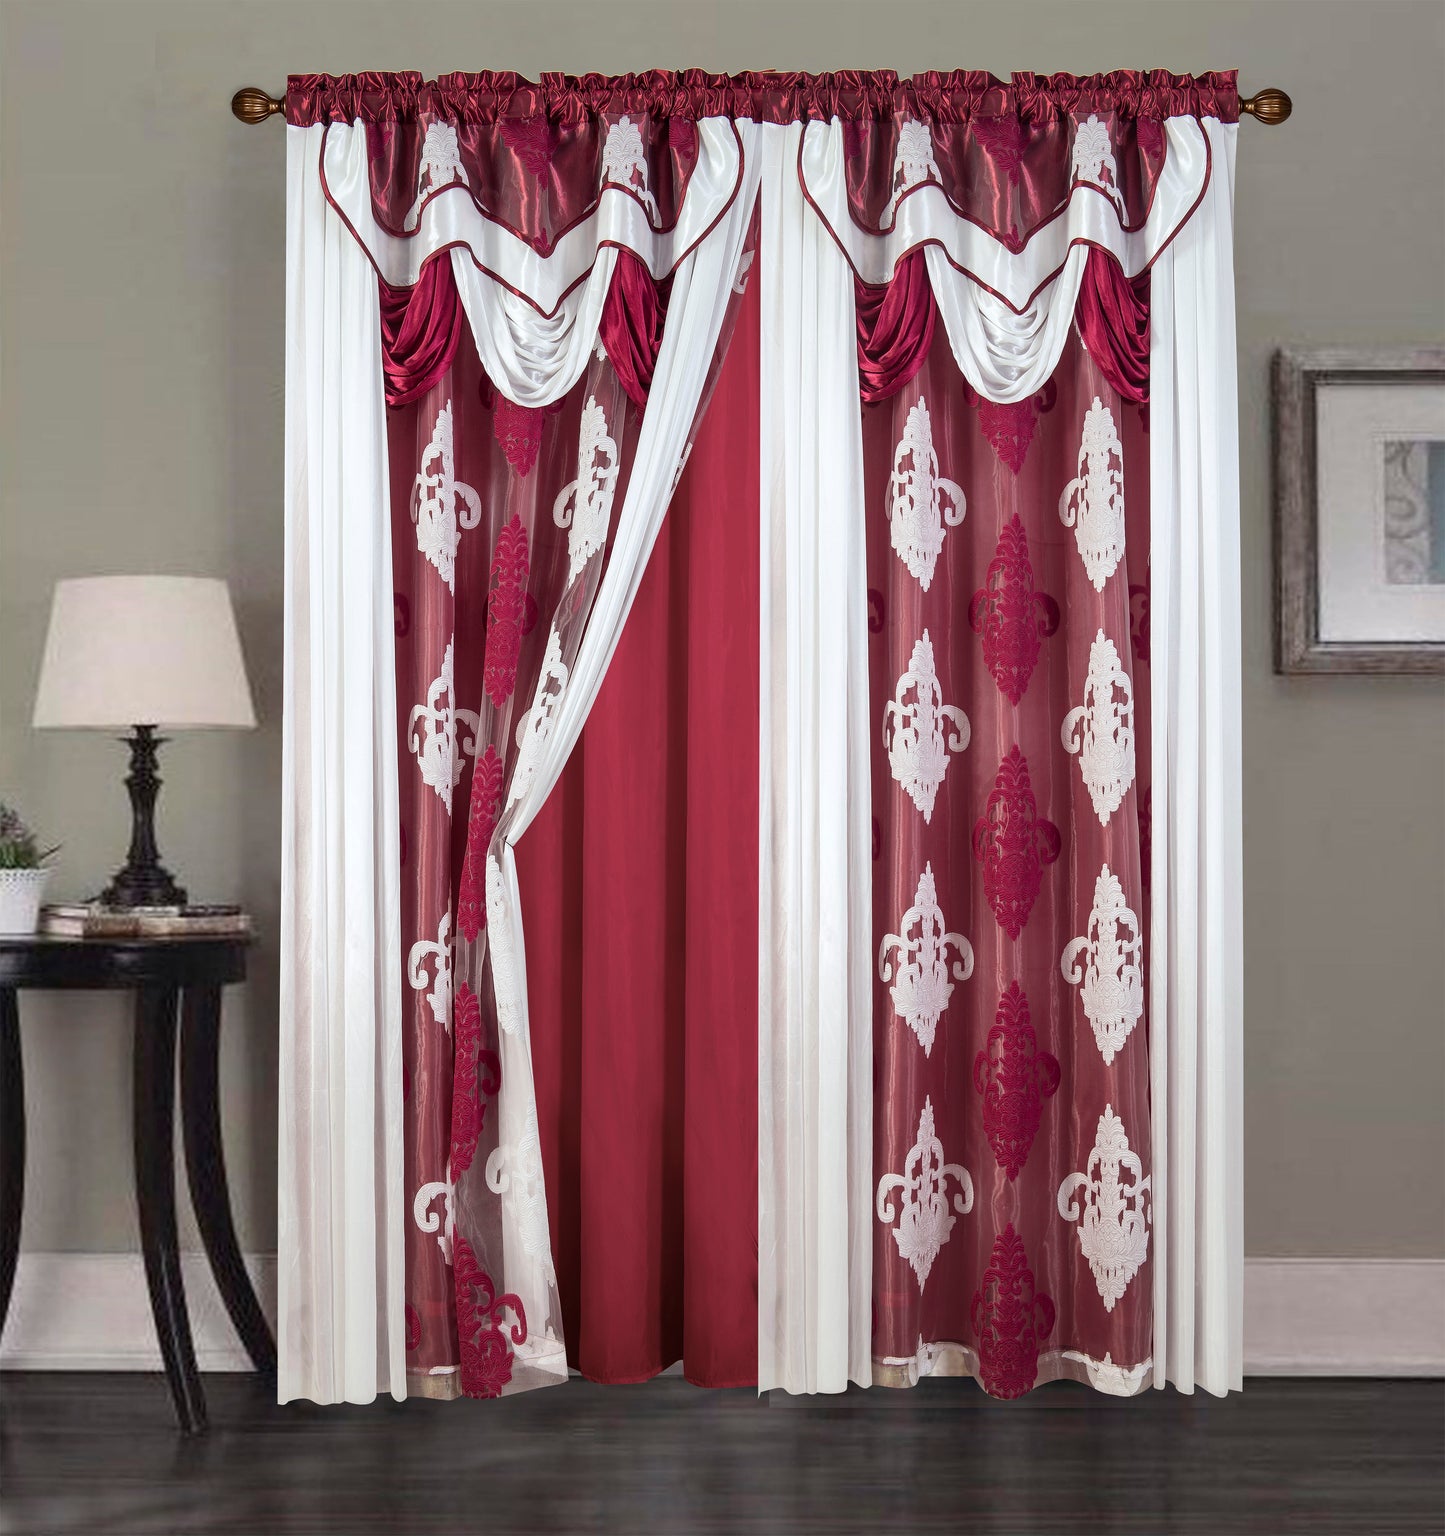 2PC CURTAIN SET W/ ATTACHED VALANCE & BACKING - Everly